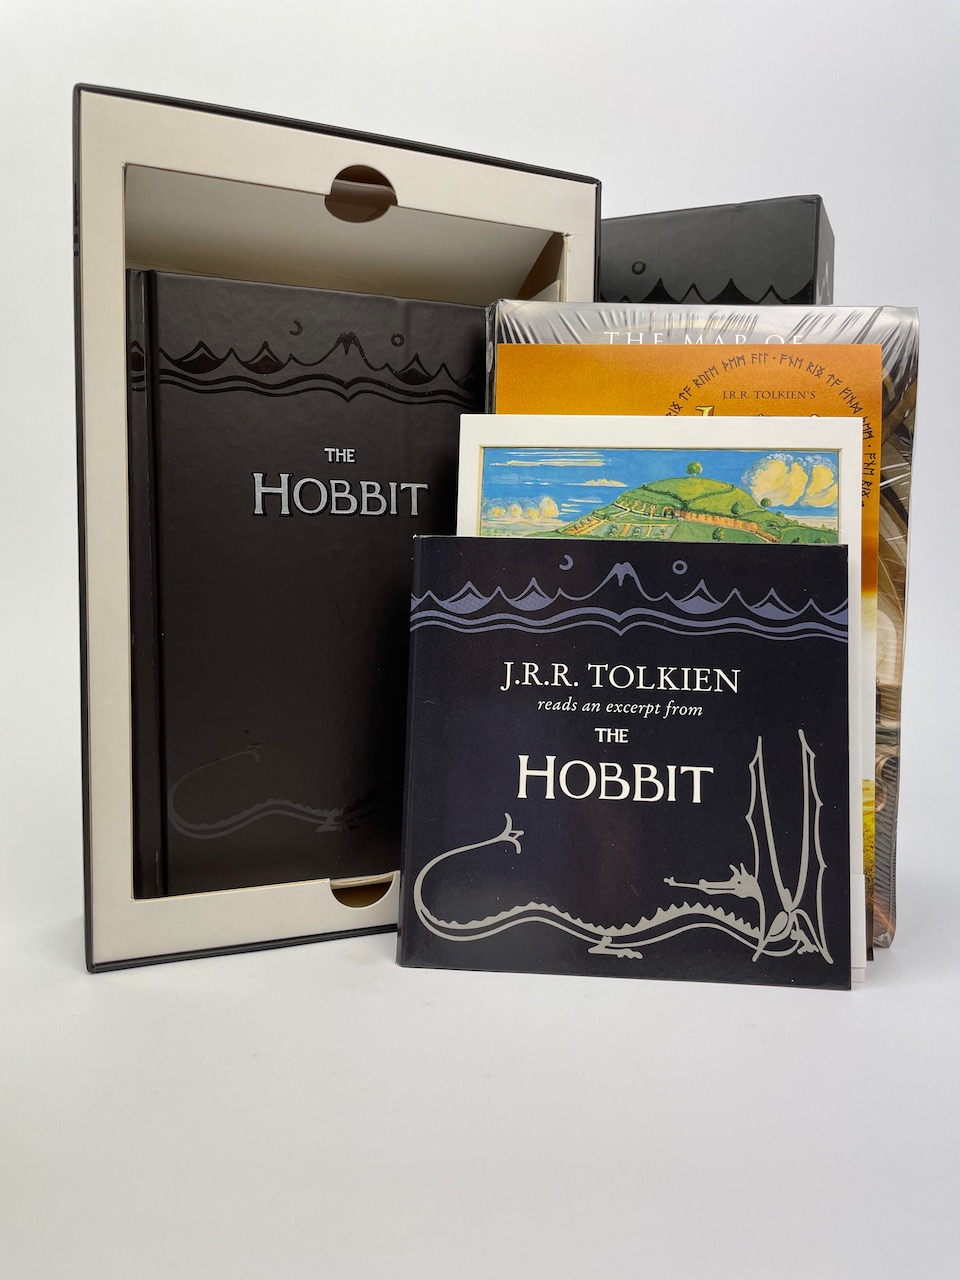 
The Hobbit, Limited Edition Collectors' Box 7